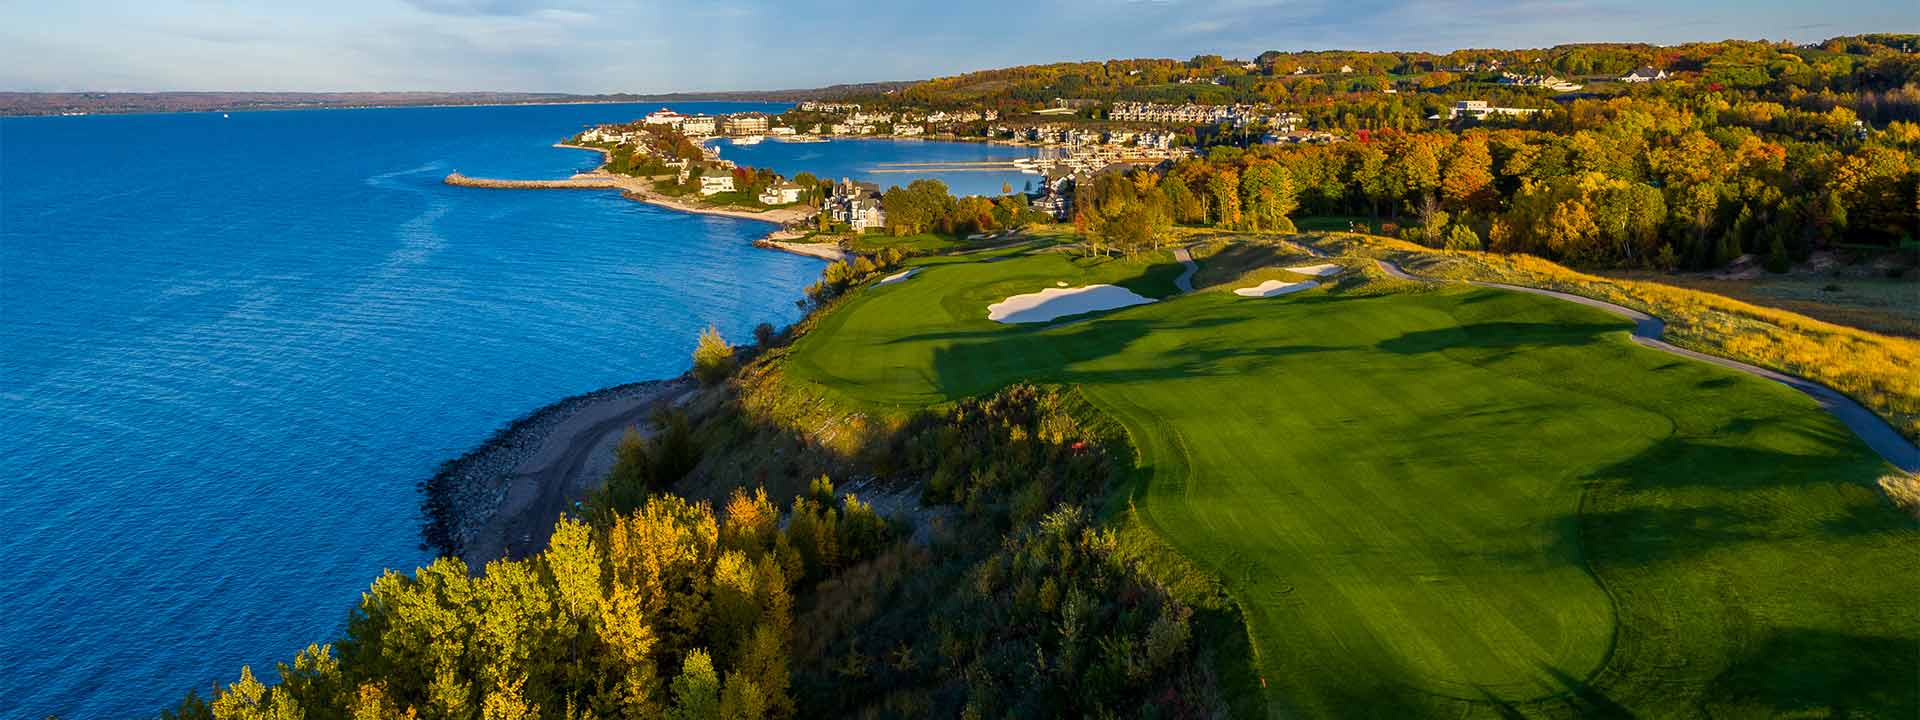 A view of one of the golf holes at the Inn at Bay Harbor.